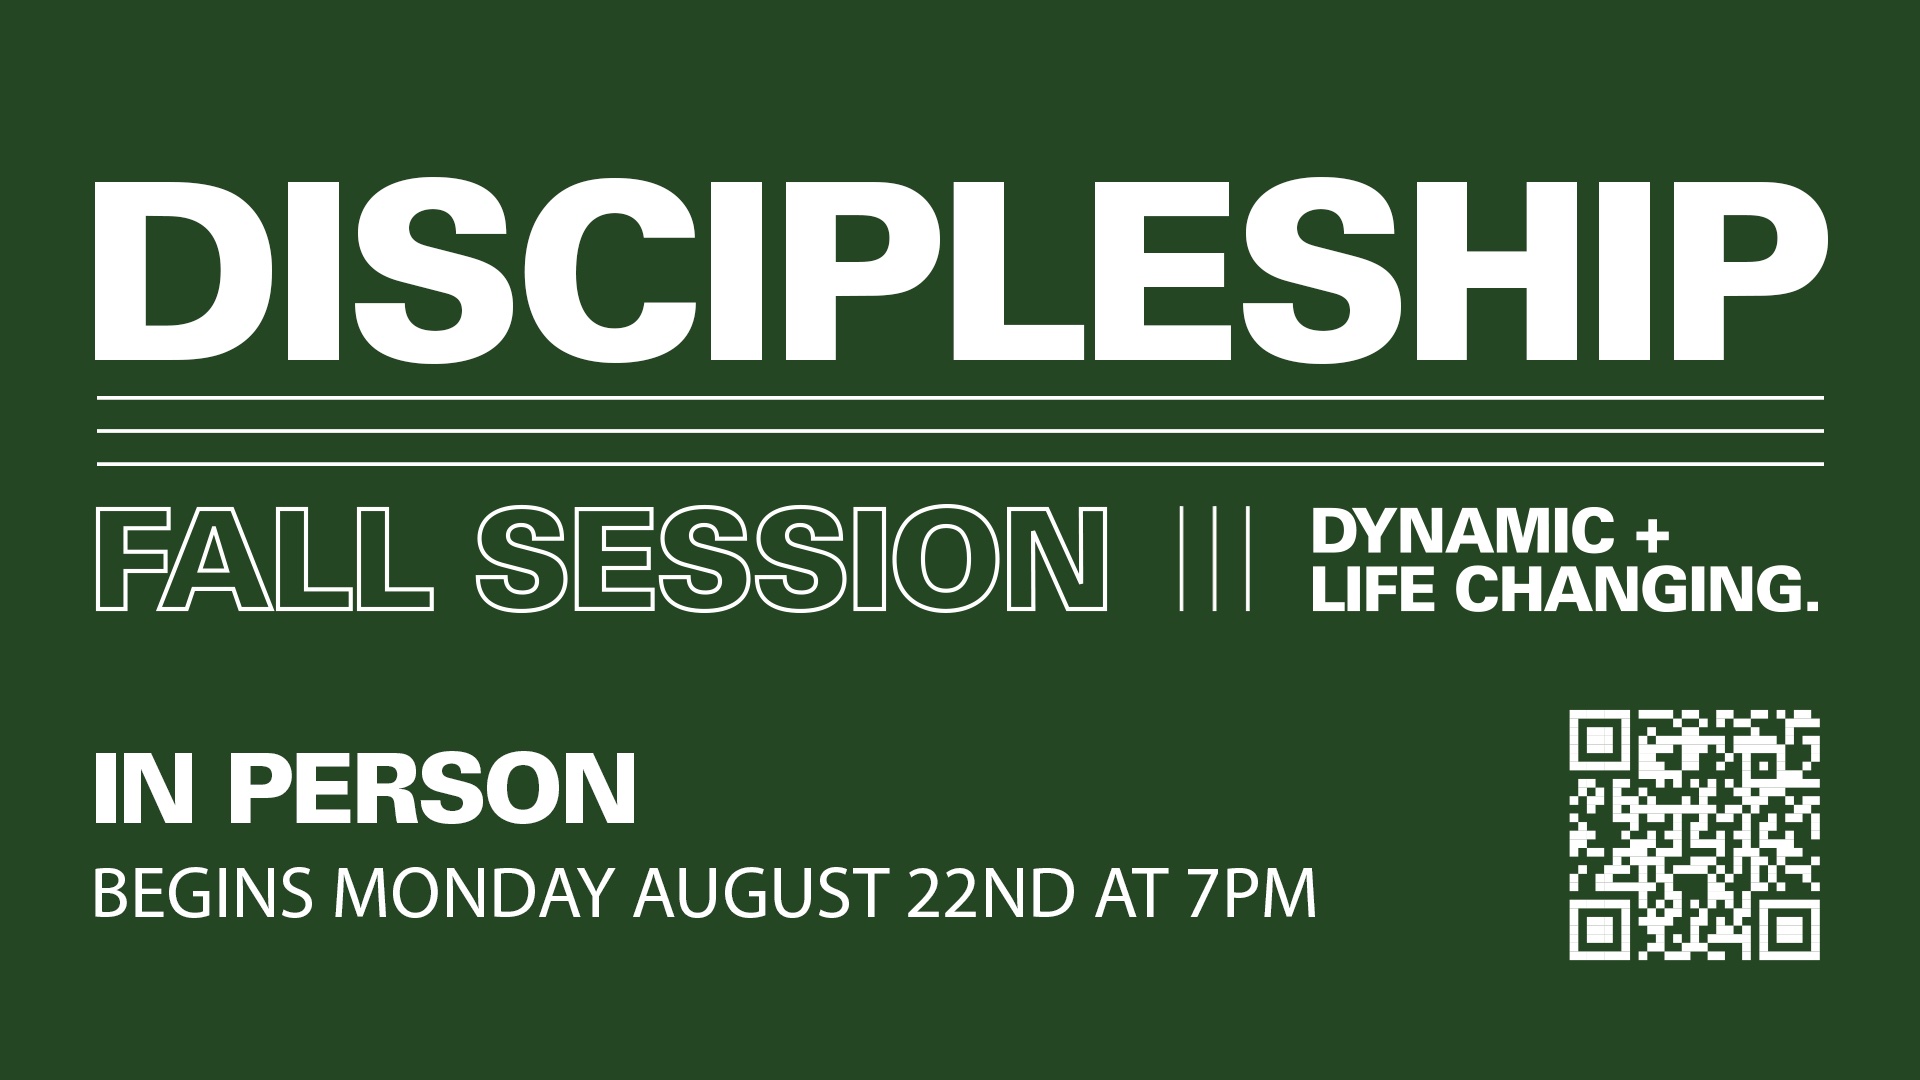 School of Discipleship - Fall Session at the Gainesville campus